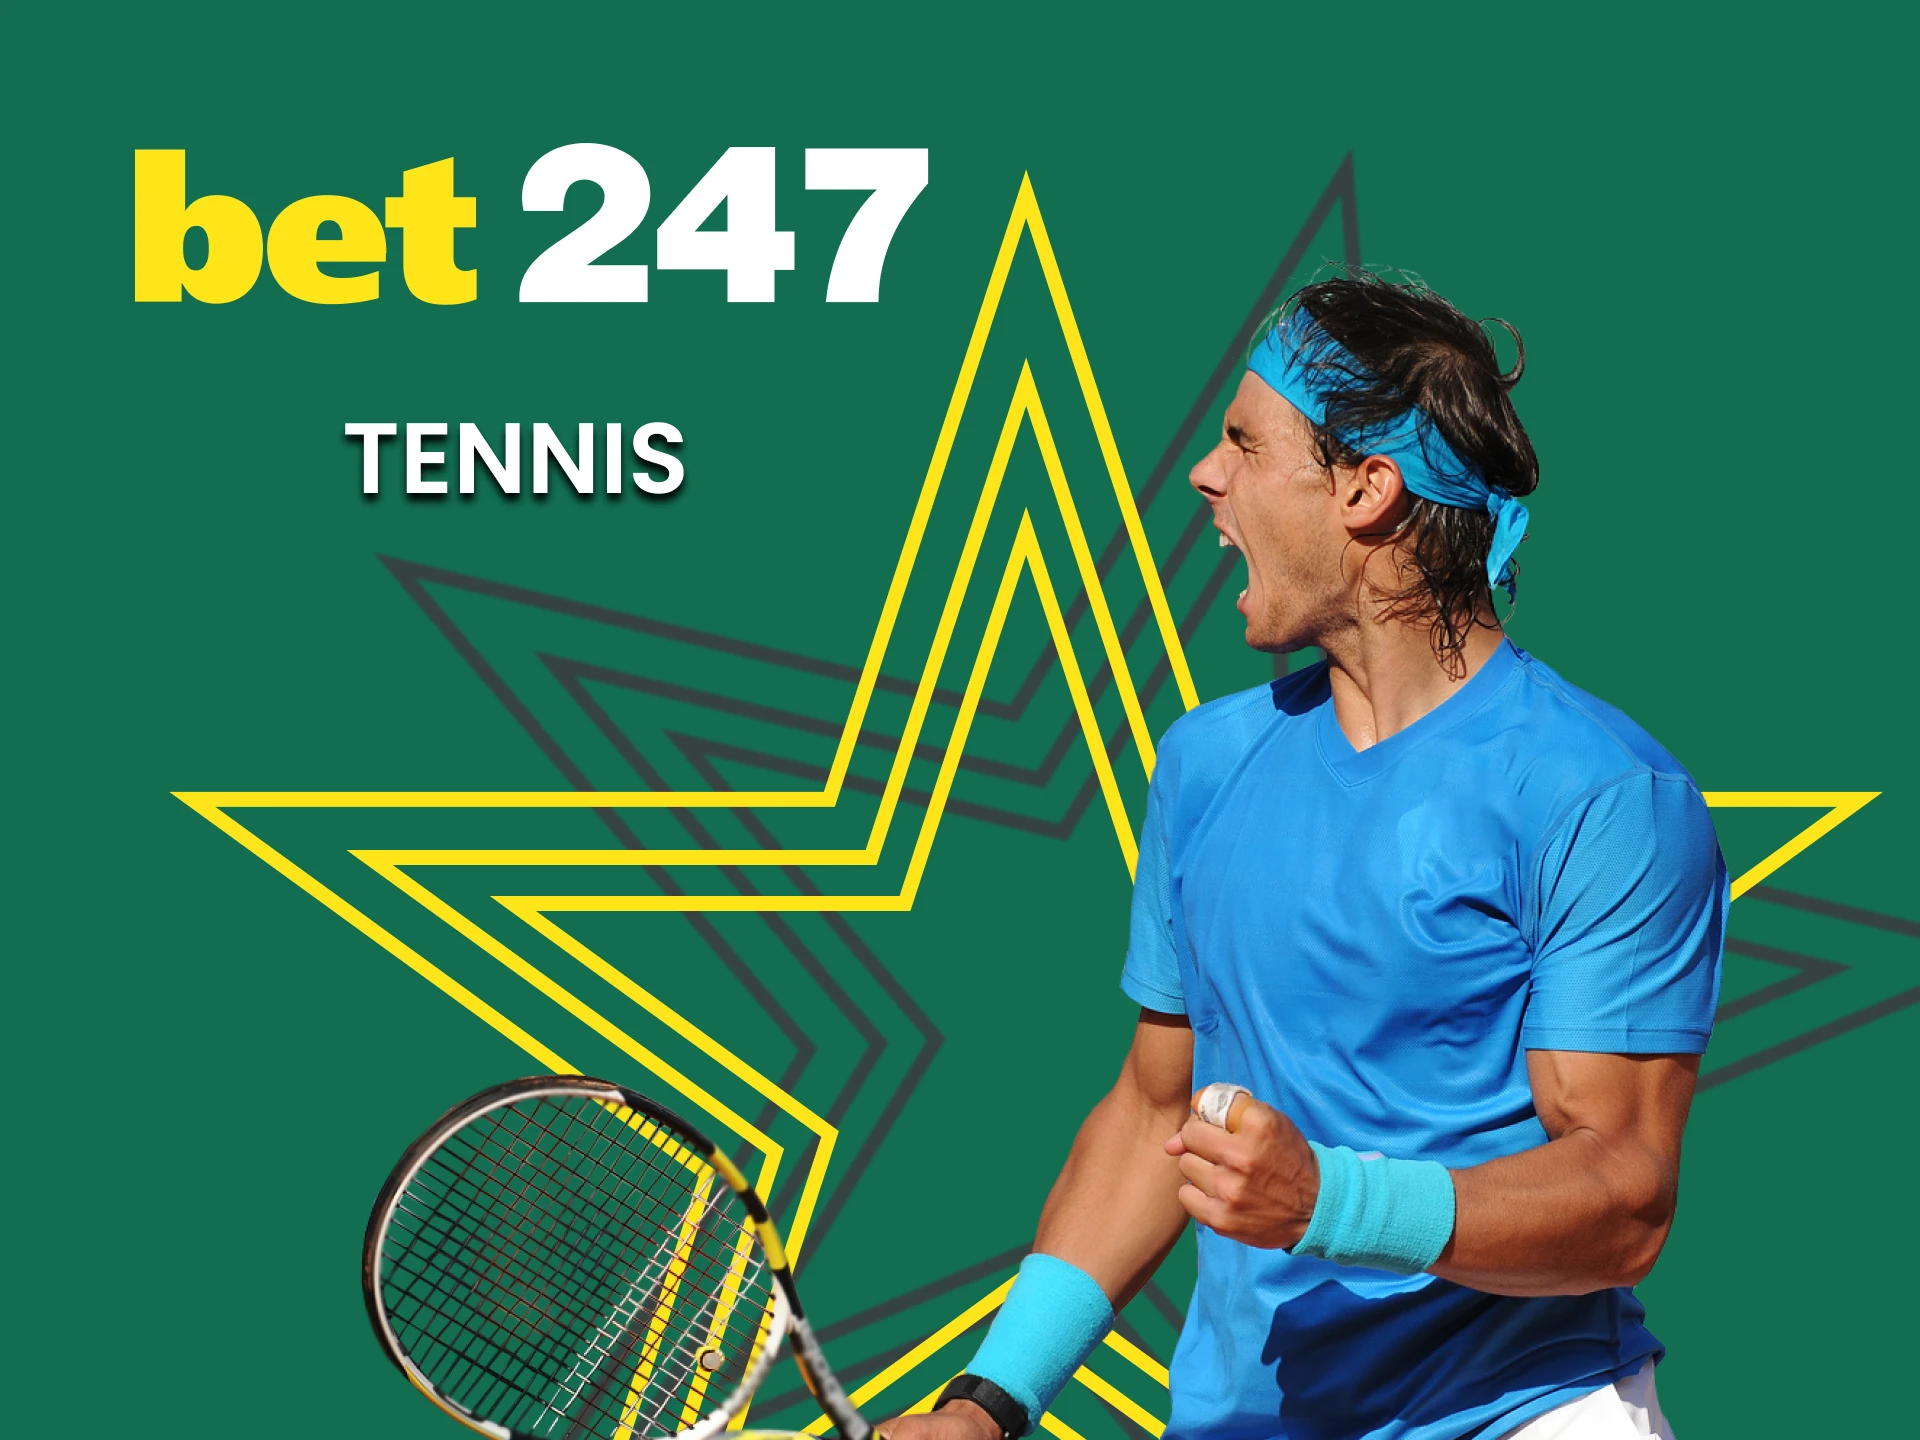 At Bet247, place a bet on tennis.